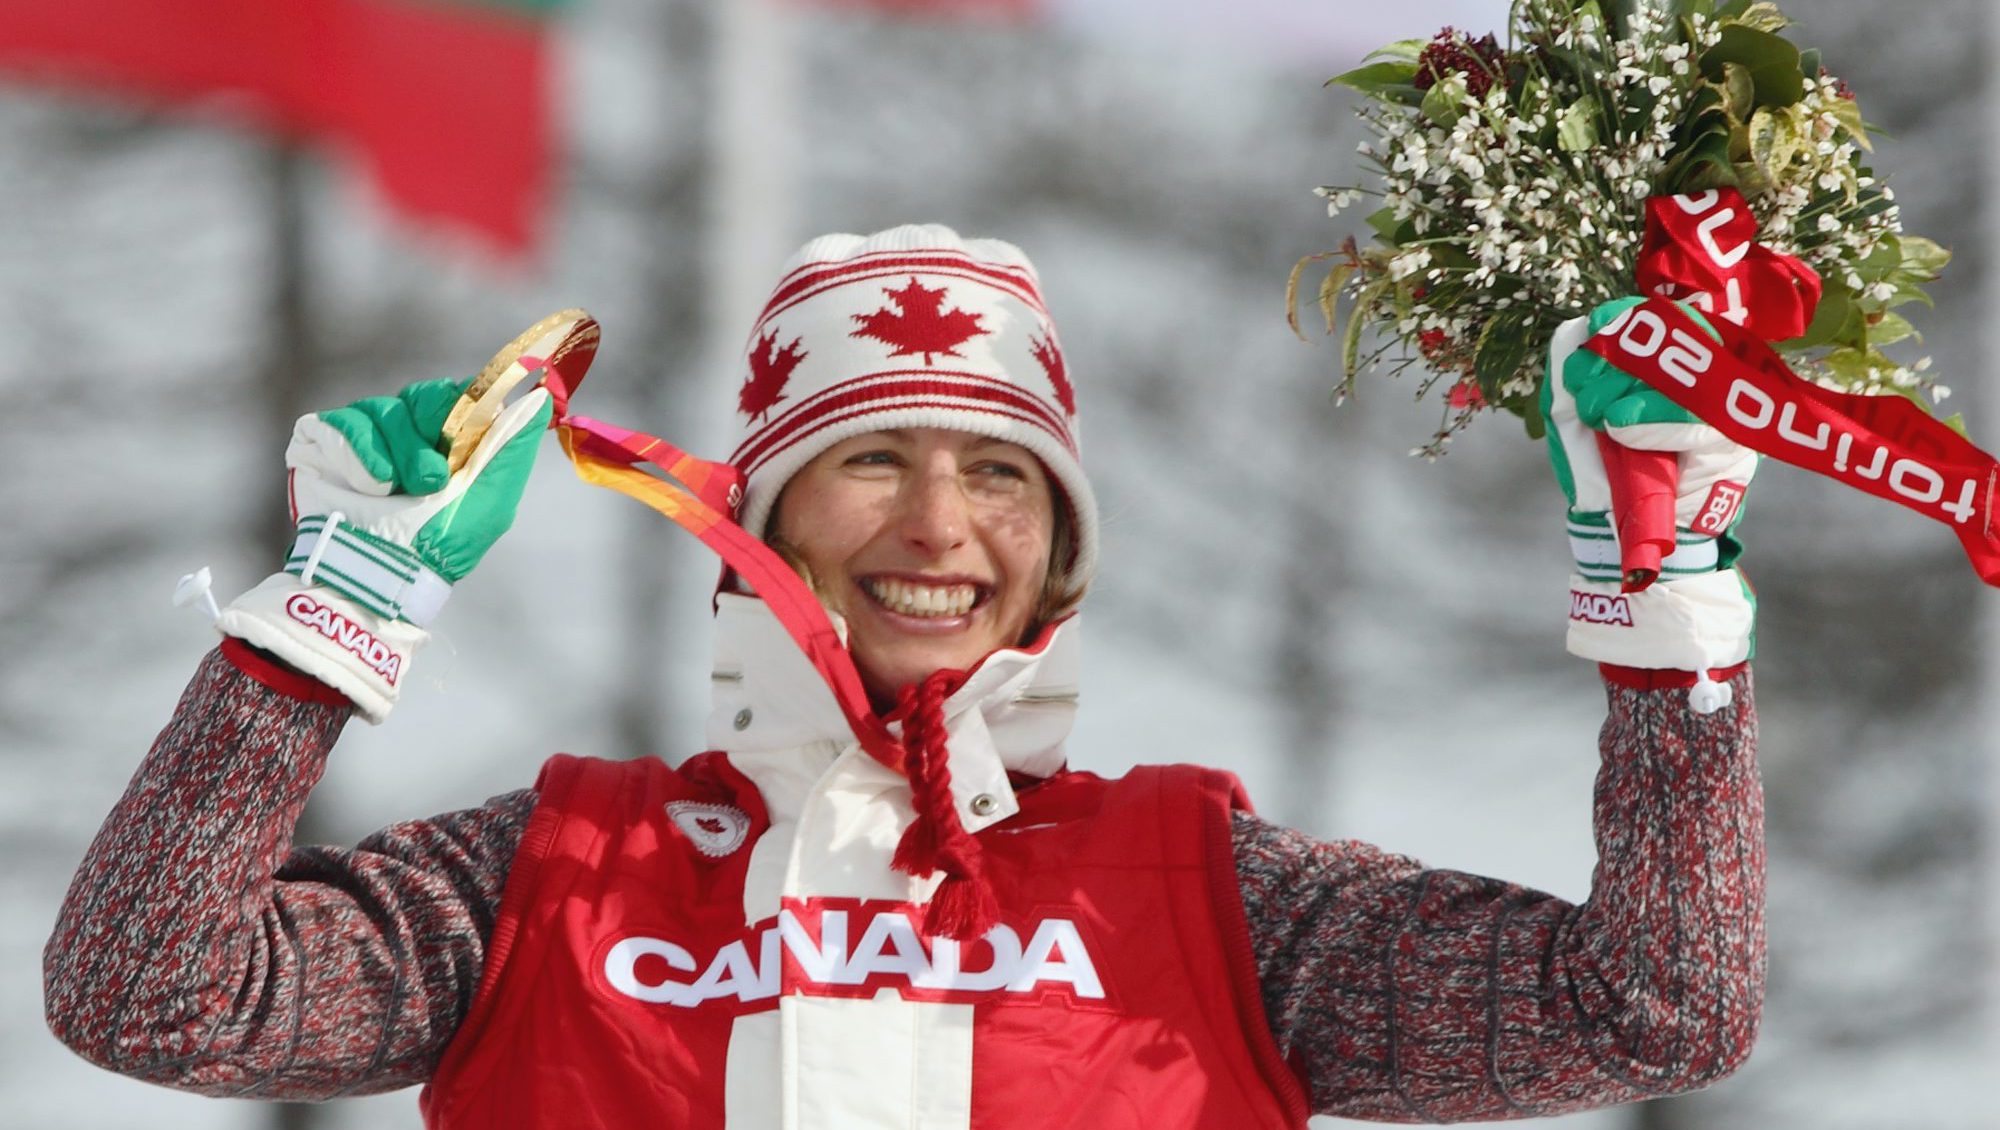 A Team Canada athlete poses with her medal